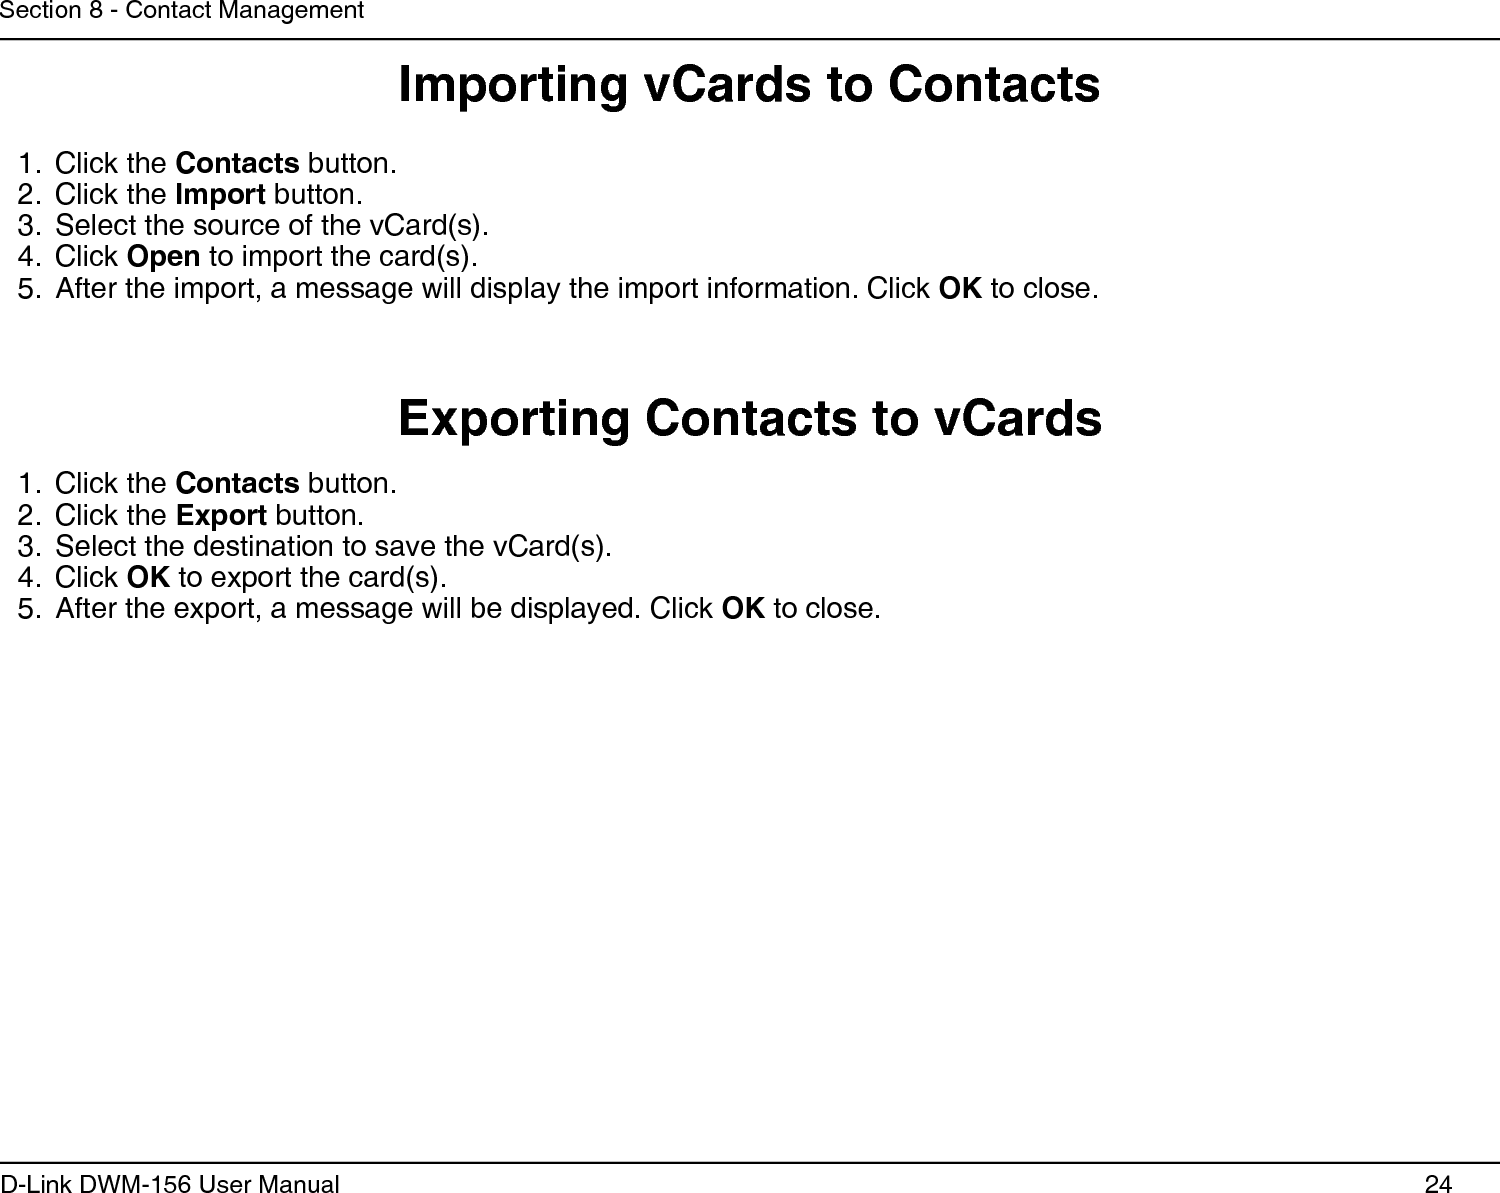 24D-Link DWM-156 User ManualSection 8 - Contact ManagementImporting vCards to ContactsExporting Contacts to vCardsClick the 1.  Contacts button.Click the 2.  Export button.Select the destination to save the vCard(s).3. Click 4.  OK to export the card(s).After the export, a message will be displayed. Click 5.  OK to close.Click the 1.  Contacts button.Click the 2.  Import button.Select the source of the vCard(s).3. Click 4.  Open to import the card(s).After the import, a message will display the import information. Click 5.  OK to close.